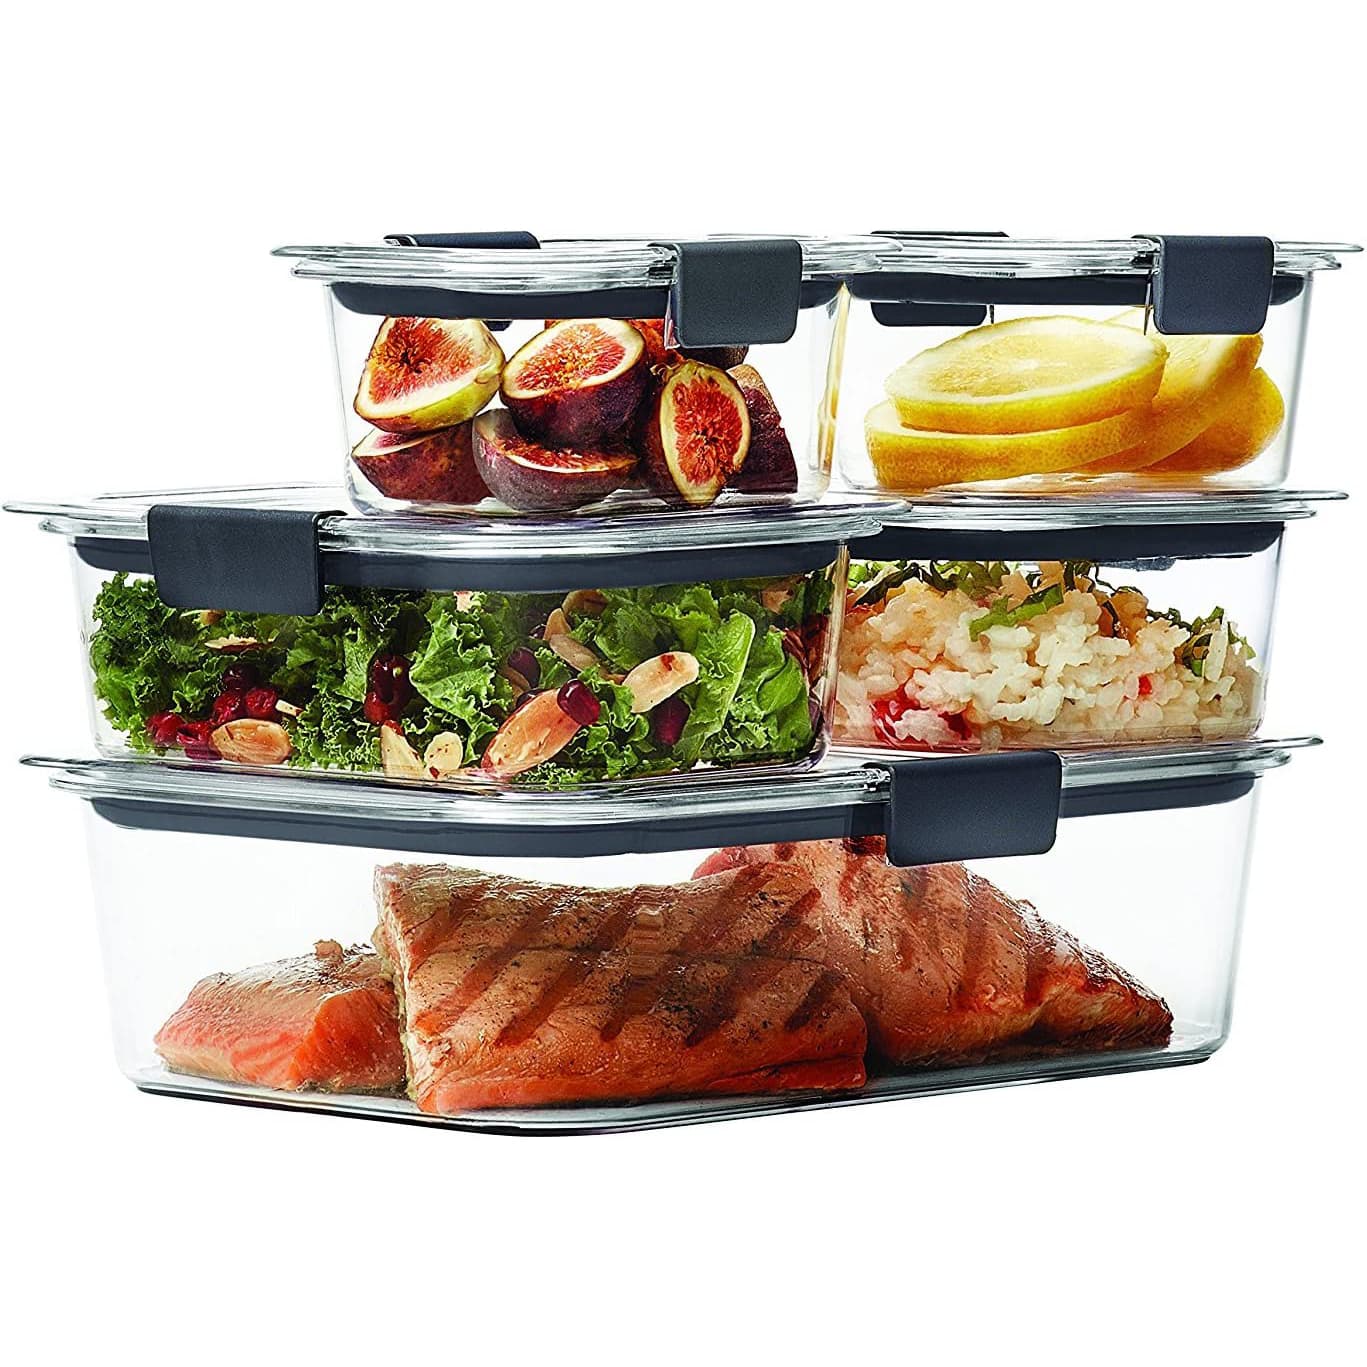 Rubbermaid, Glad, and More Food Storage Brands Are Up to 61% Off Before  October Prime Day